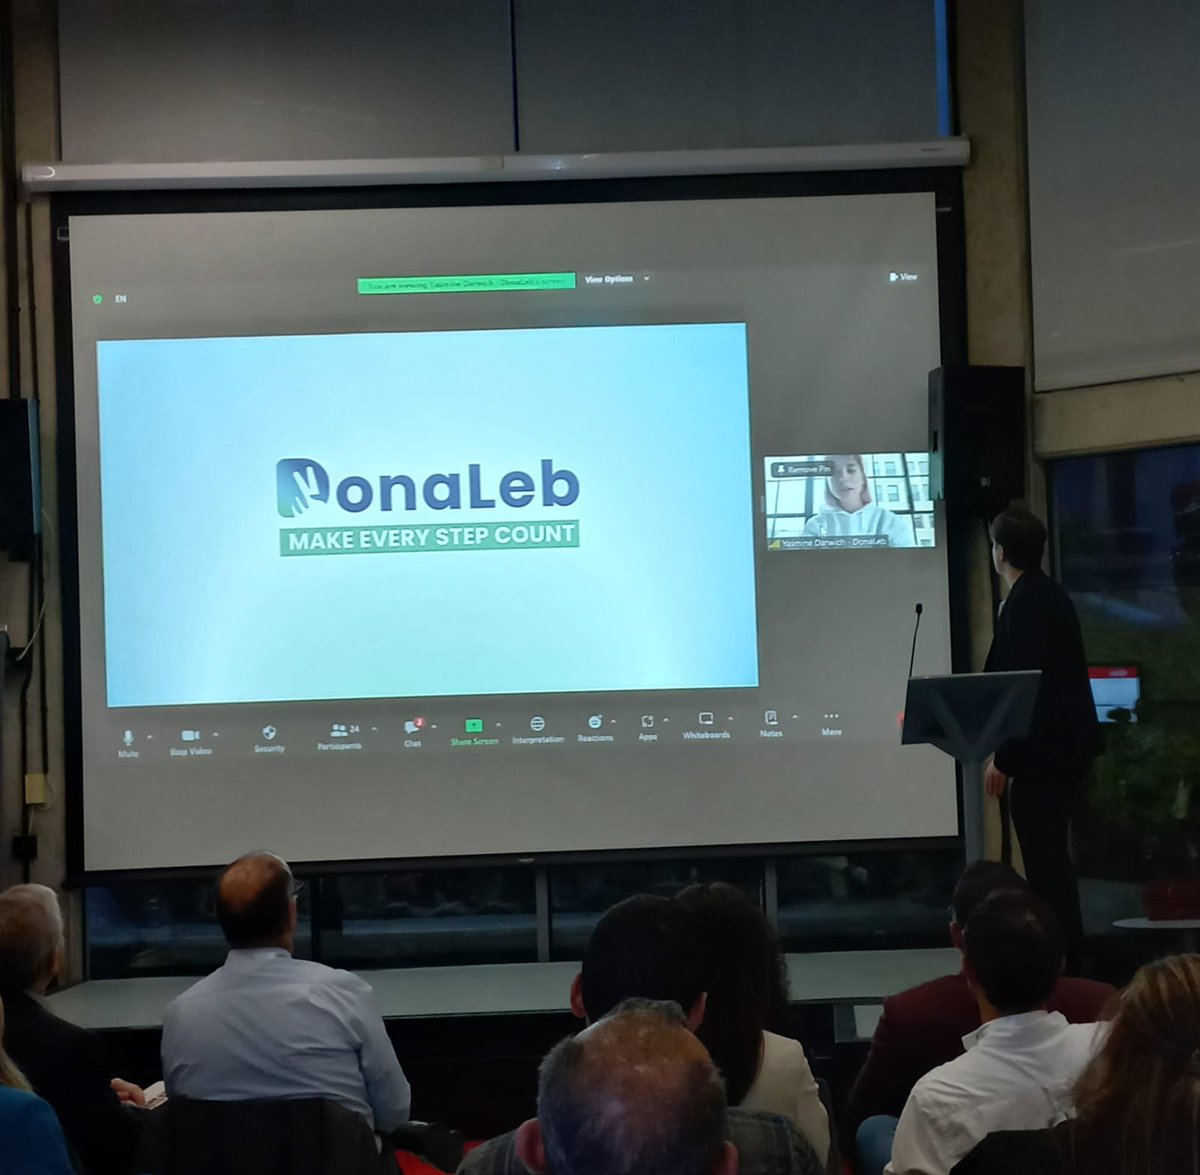 Let's watch the “DonaLeb” pitch, a company which is dedicated to promoting health and well-being through its innovative social solution. Get ready to be inspired by their commitment to positively impact society.
#AUB #BDD #Innovation #iPark #demoday2024 #Socialinnovation